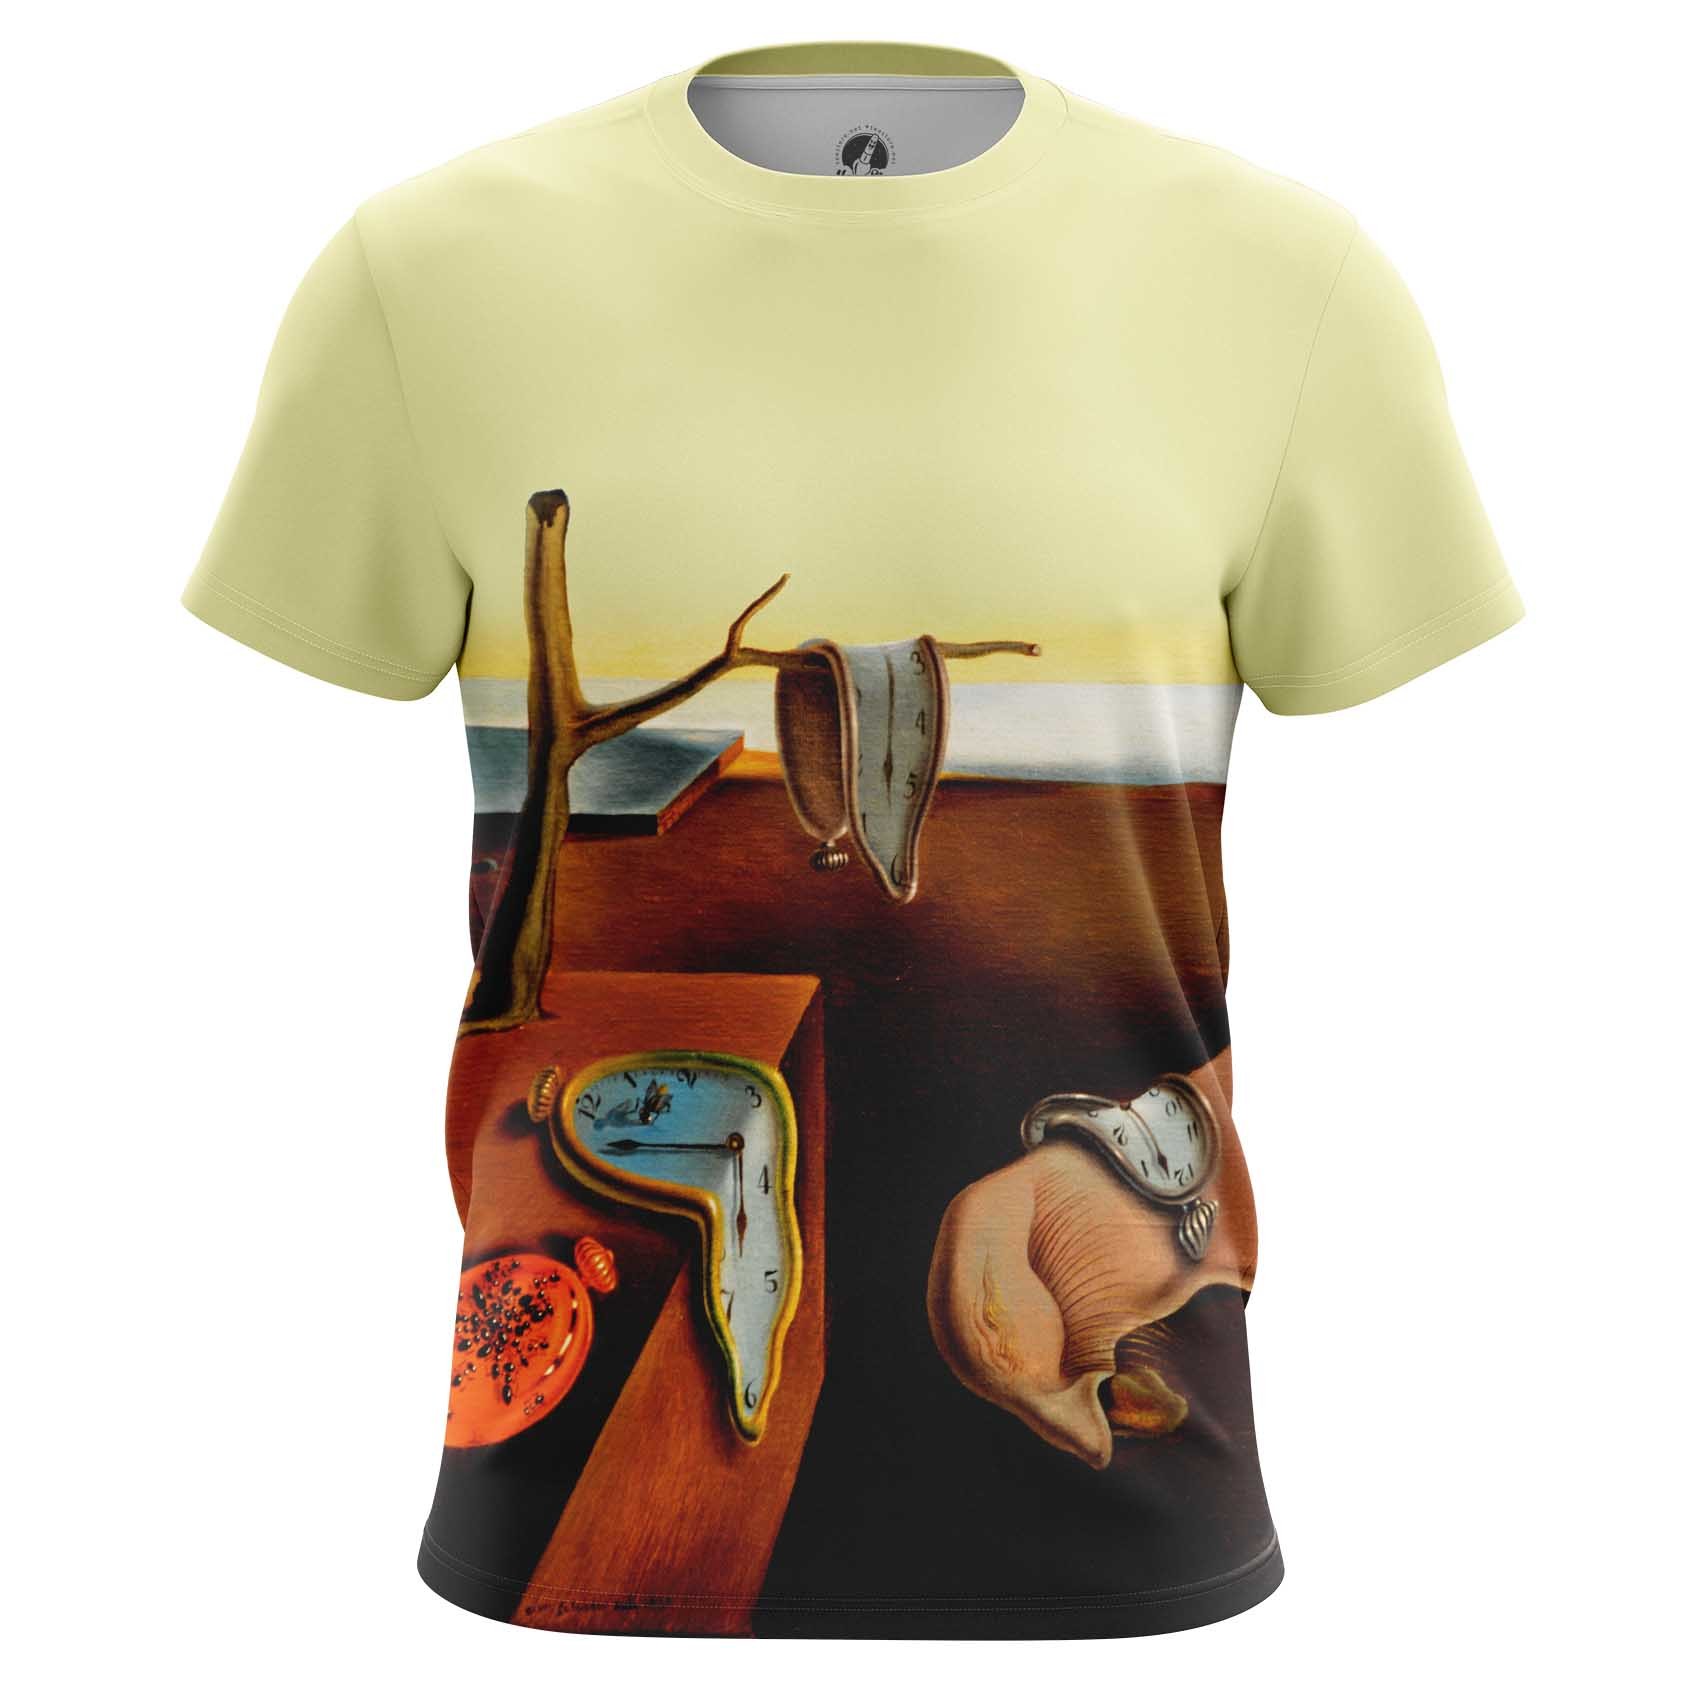 Salvador Dali t-shirt painting The Persistence of Memory art all over full print 